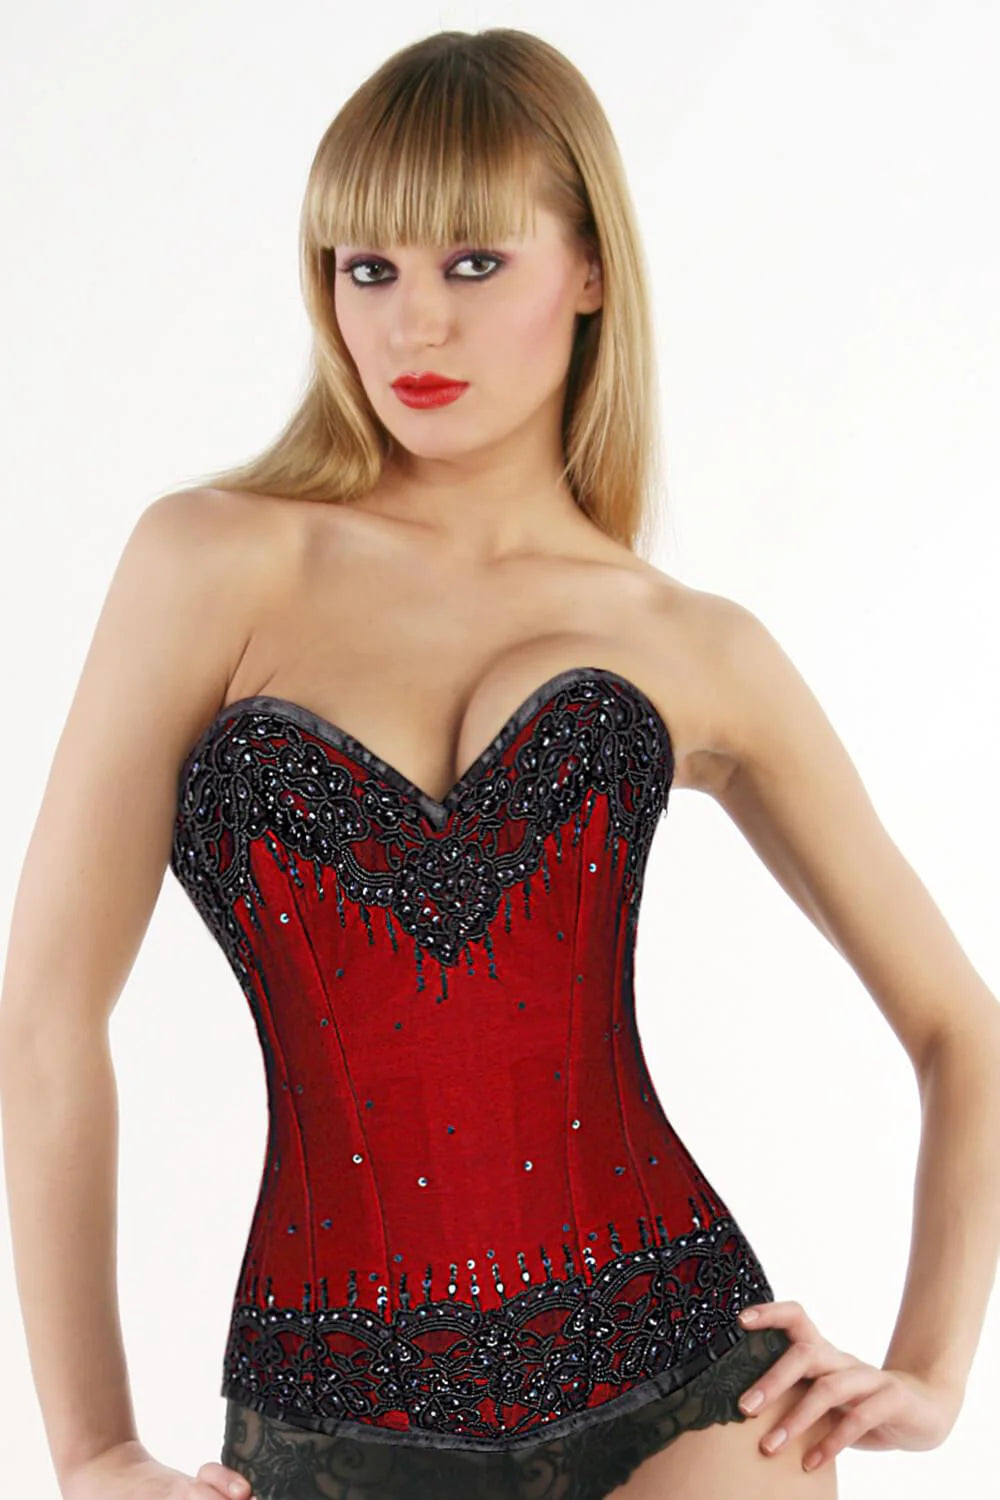 A model wearing the red and black Beaded Lace Overlay Couture Corset, front view.